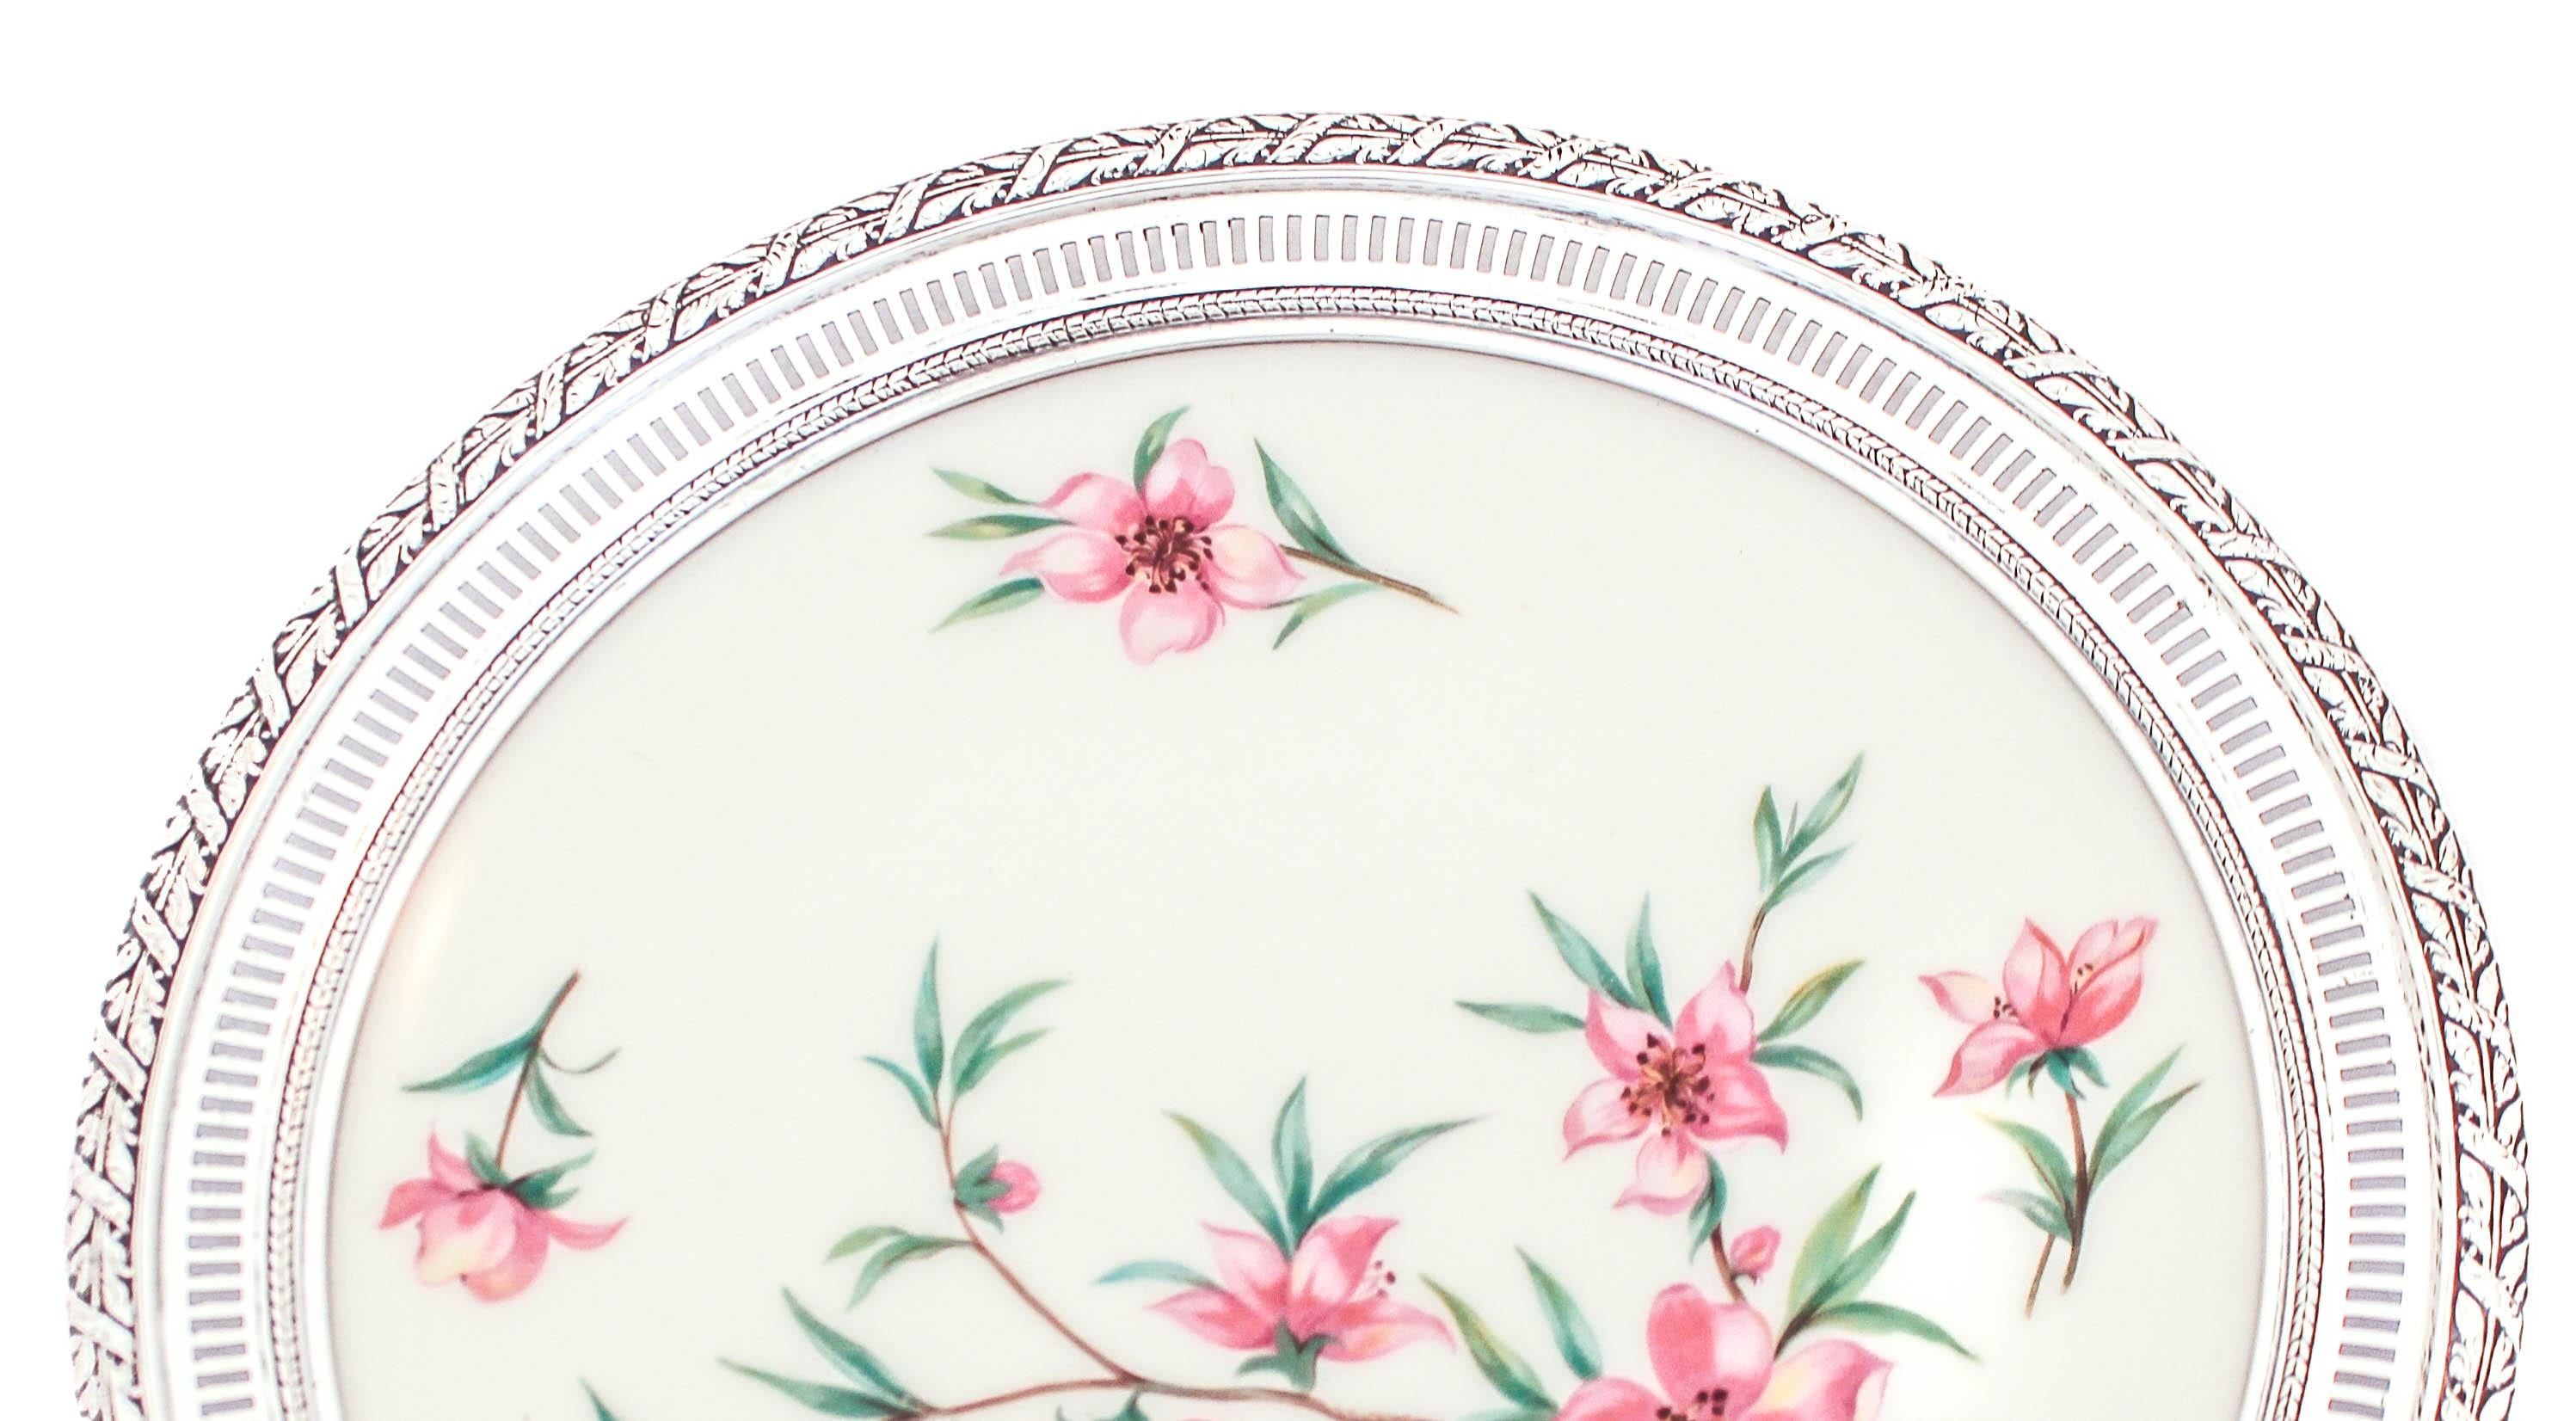 Being offered is a sterling silver and porcelain plate.  The boarder is sterling and made by Fisher Brothers and the plate is porcelain and made by Lenox China.  The silver has a cutout pattern and floral design going around the rim.  The porcelain